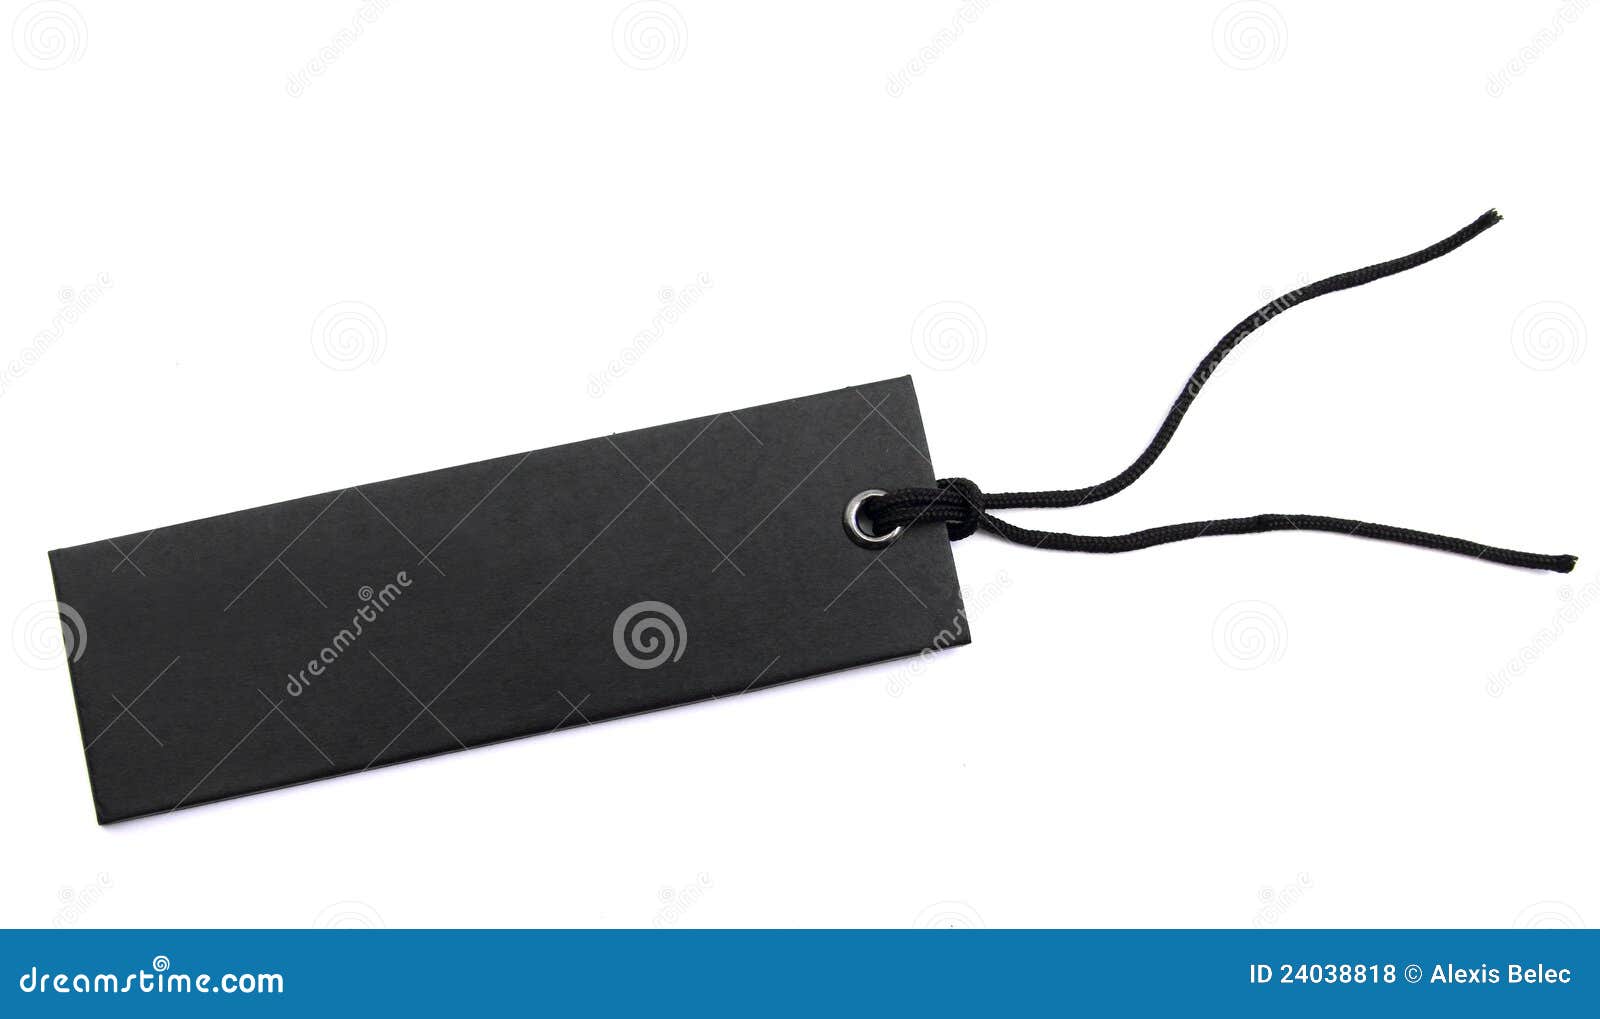 Sales tag stock photo. Image of label, background, sale - 24038818